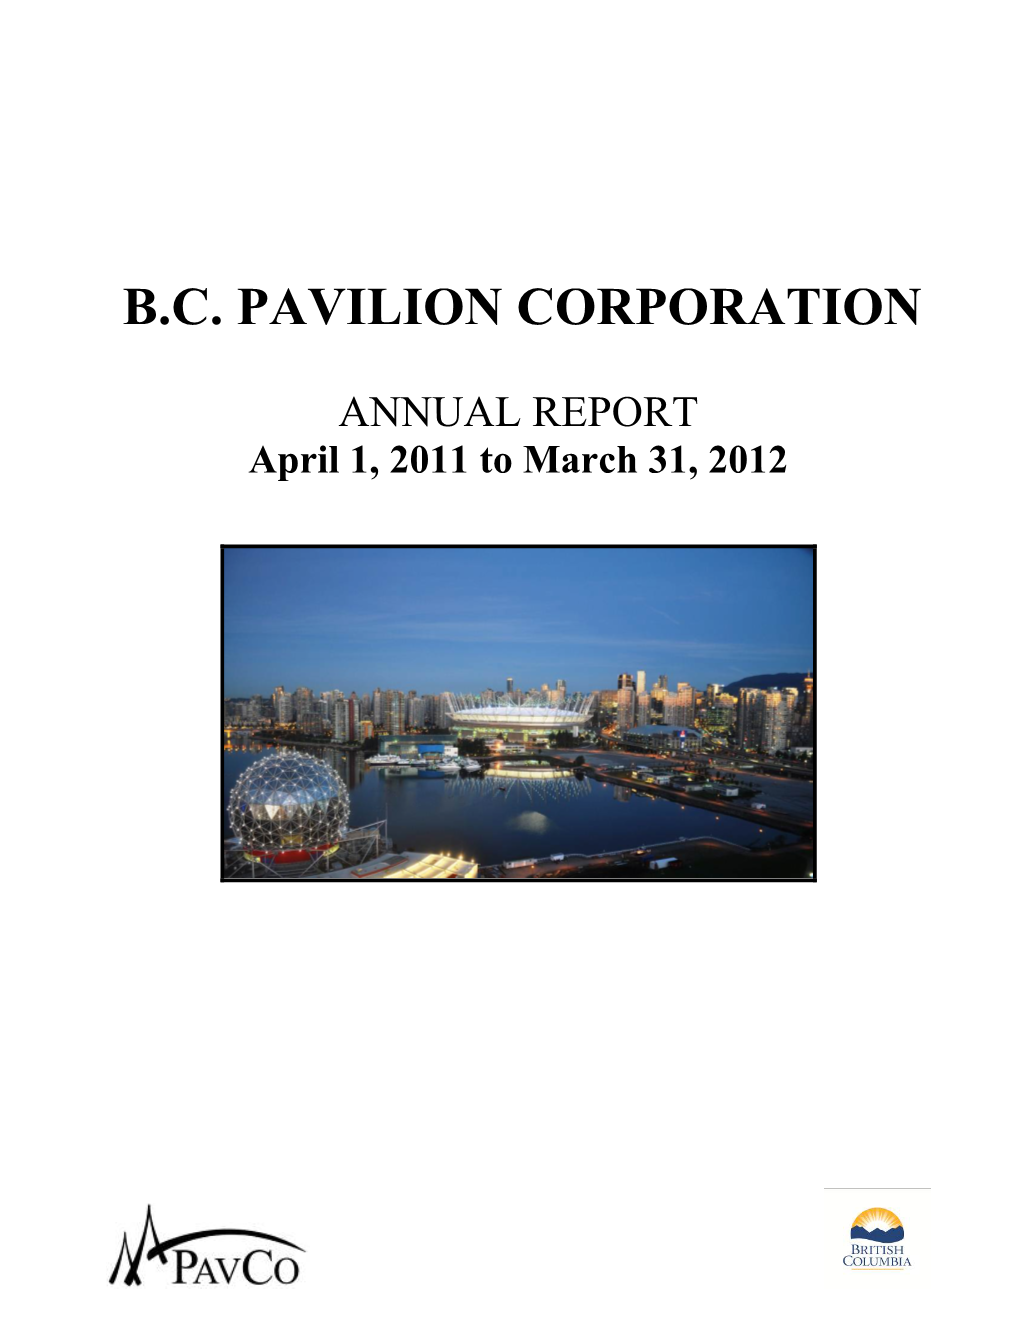 ANNUAL REPORT April 1, 2011 to March 31, 2012